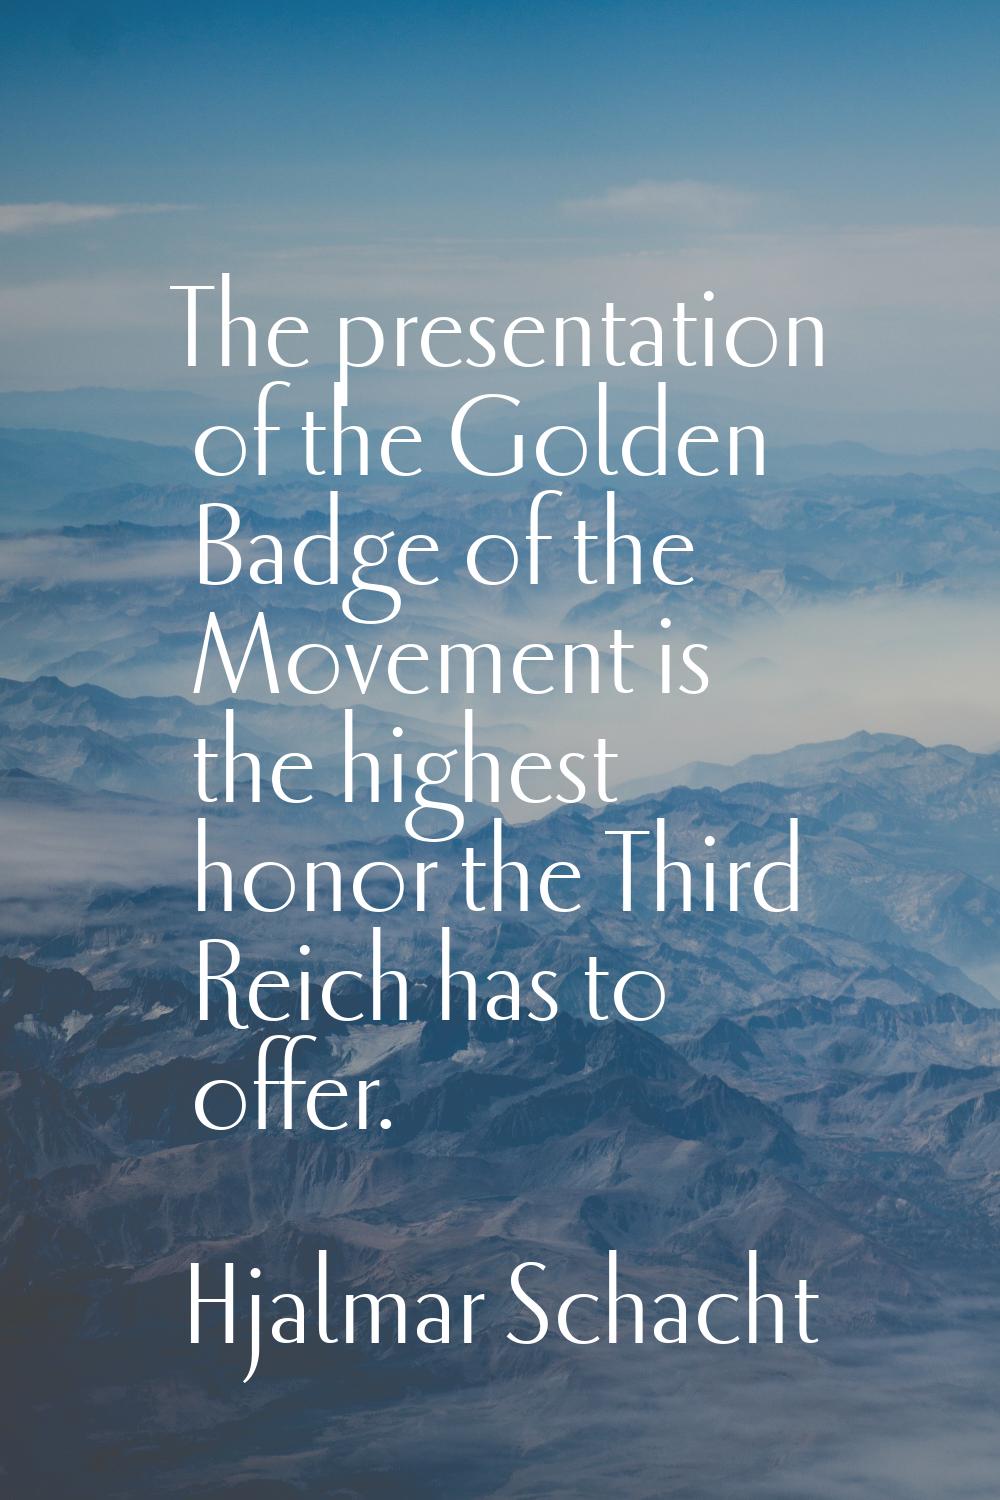 The presentation of the Golden Badge of the Movement is the highest honor the Third Reich has to of